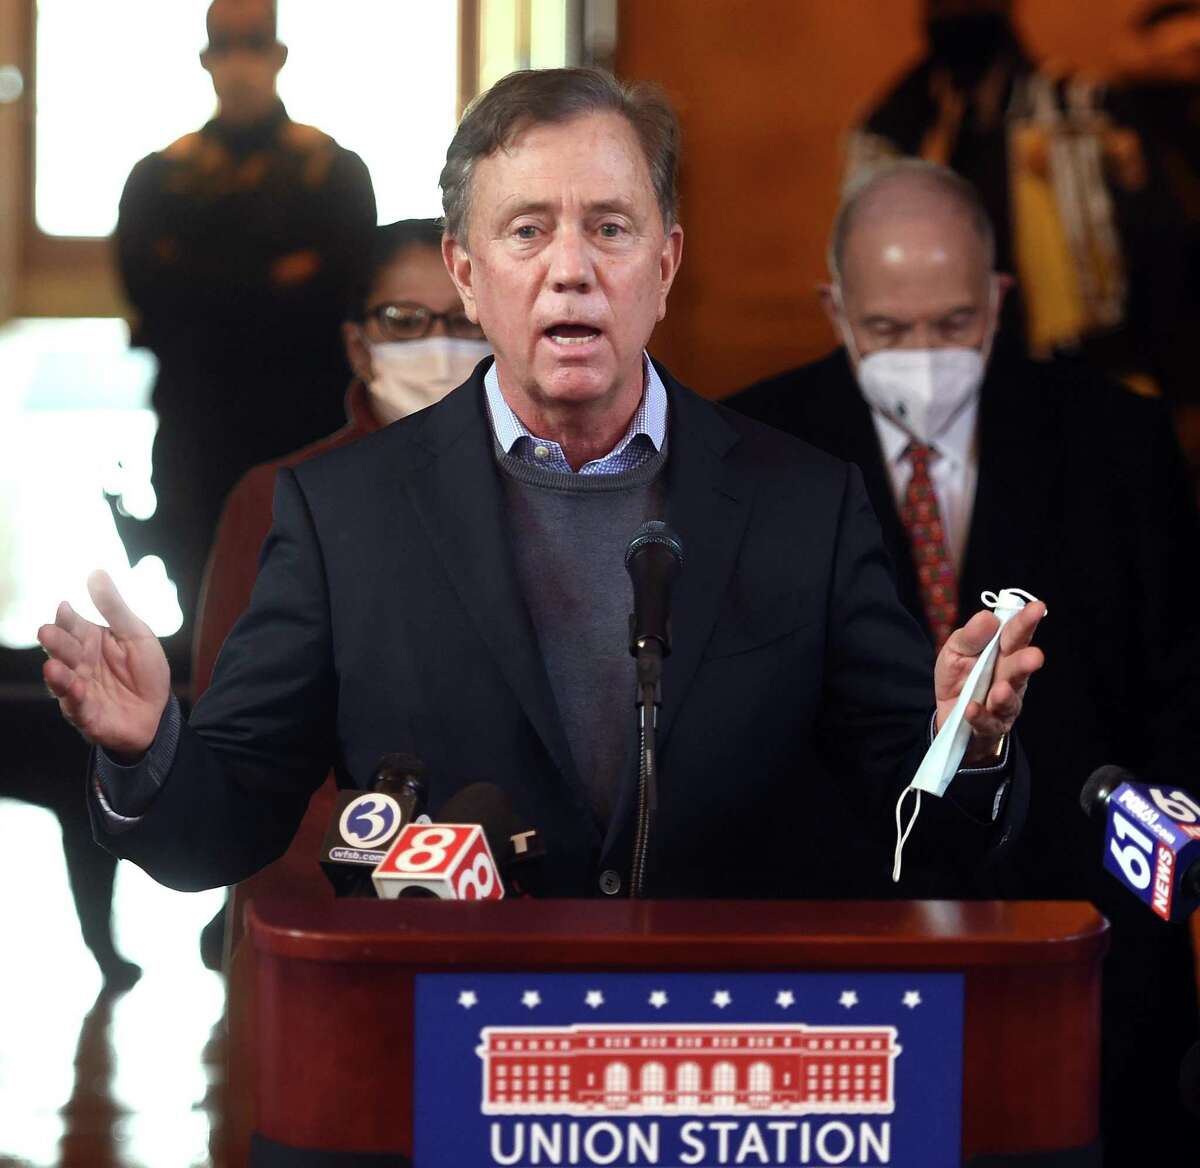 Gov. Ned Lamont speaks at a press conference before the signing of a lease for a partnership agreement for Union Station and State Street Station in New Haven on December 21, 2021.